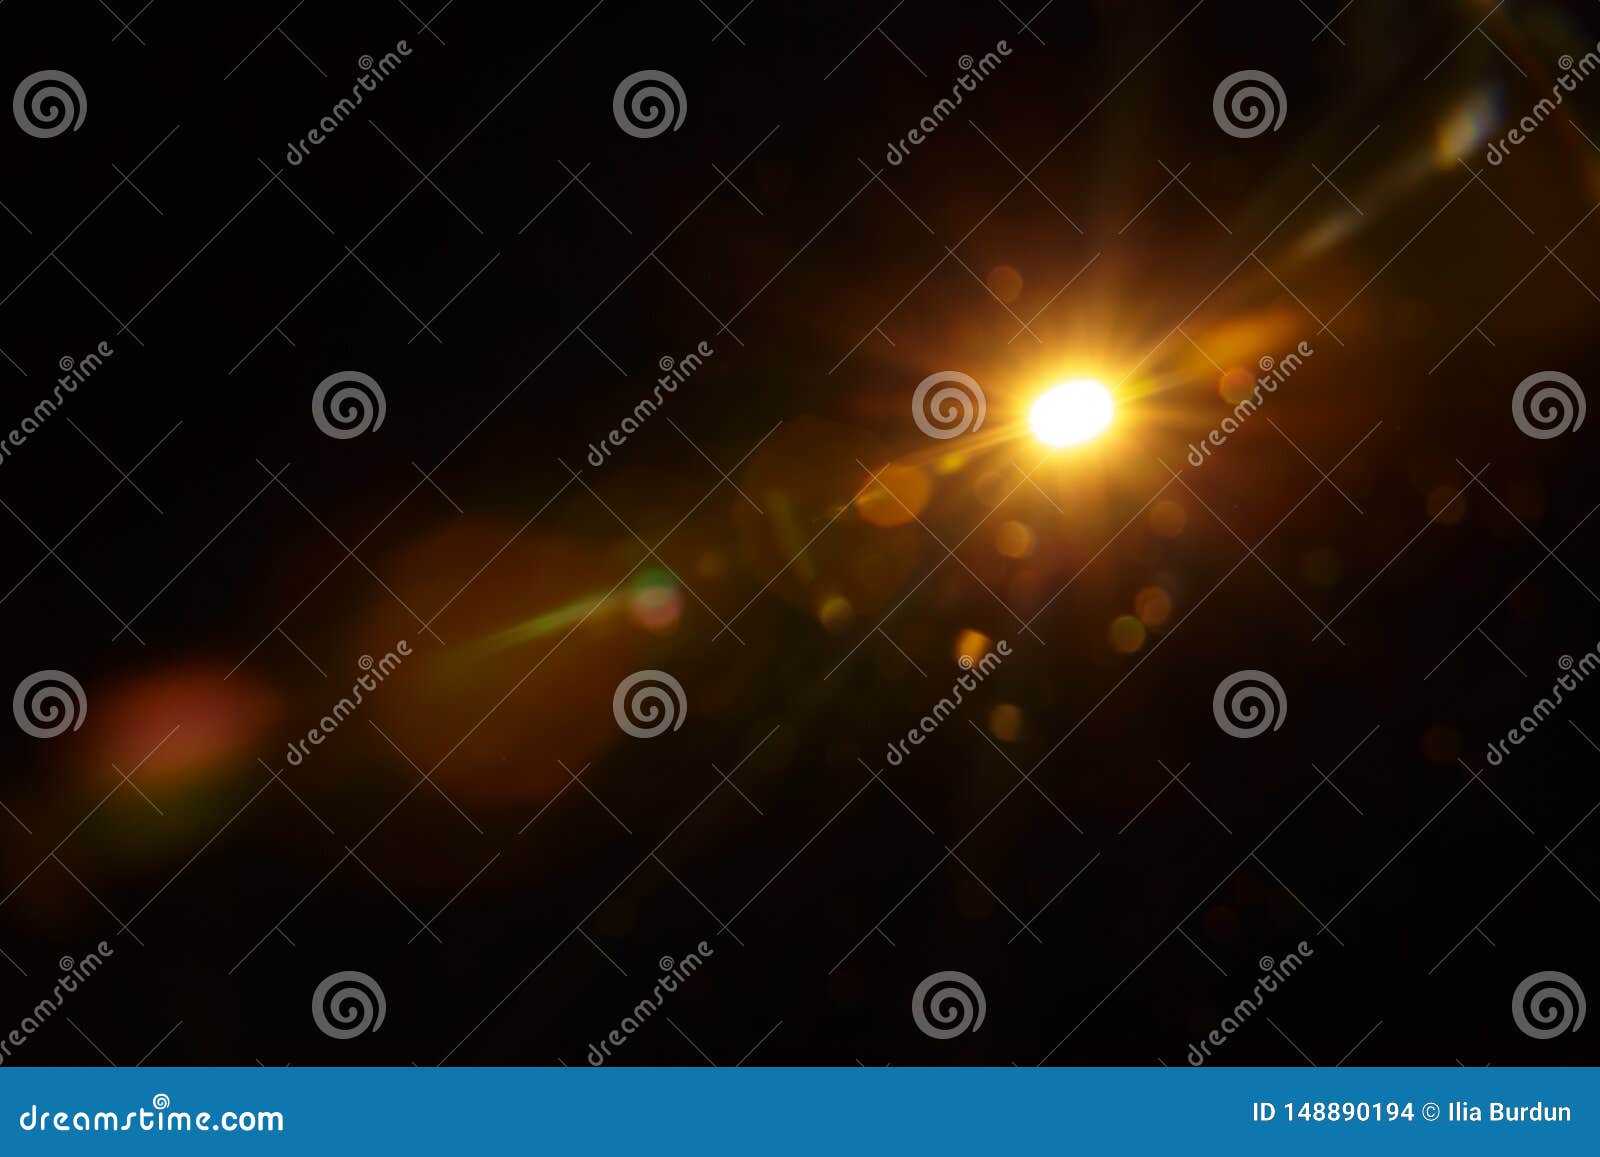 abstract natural sun flare on the black